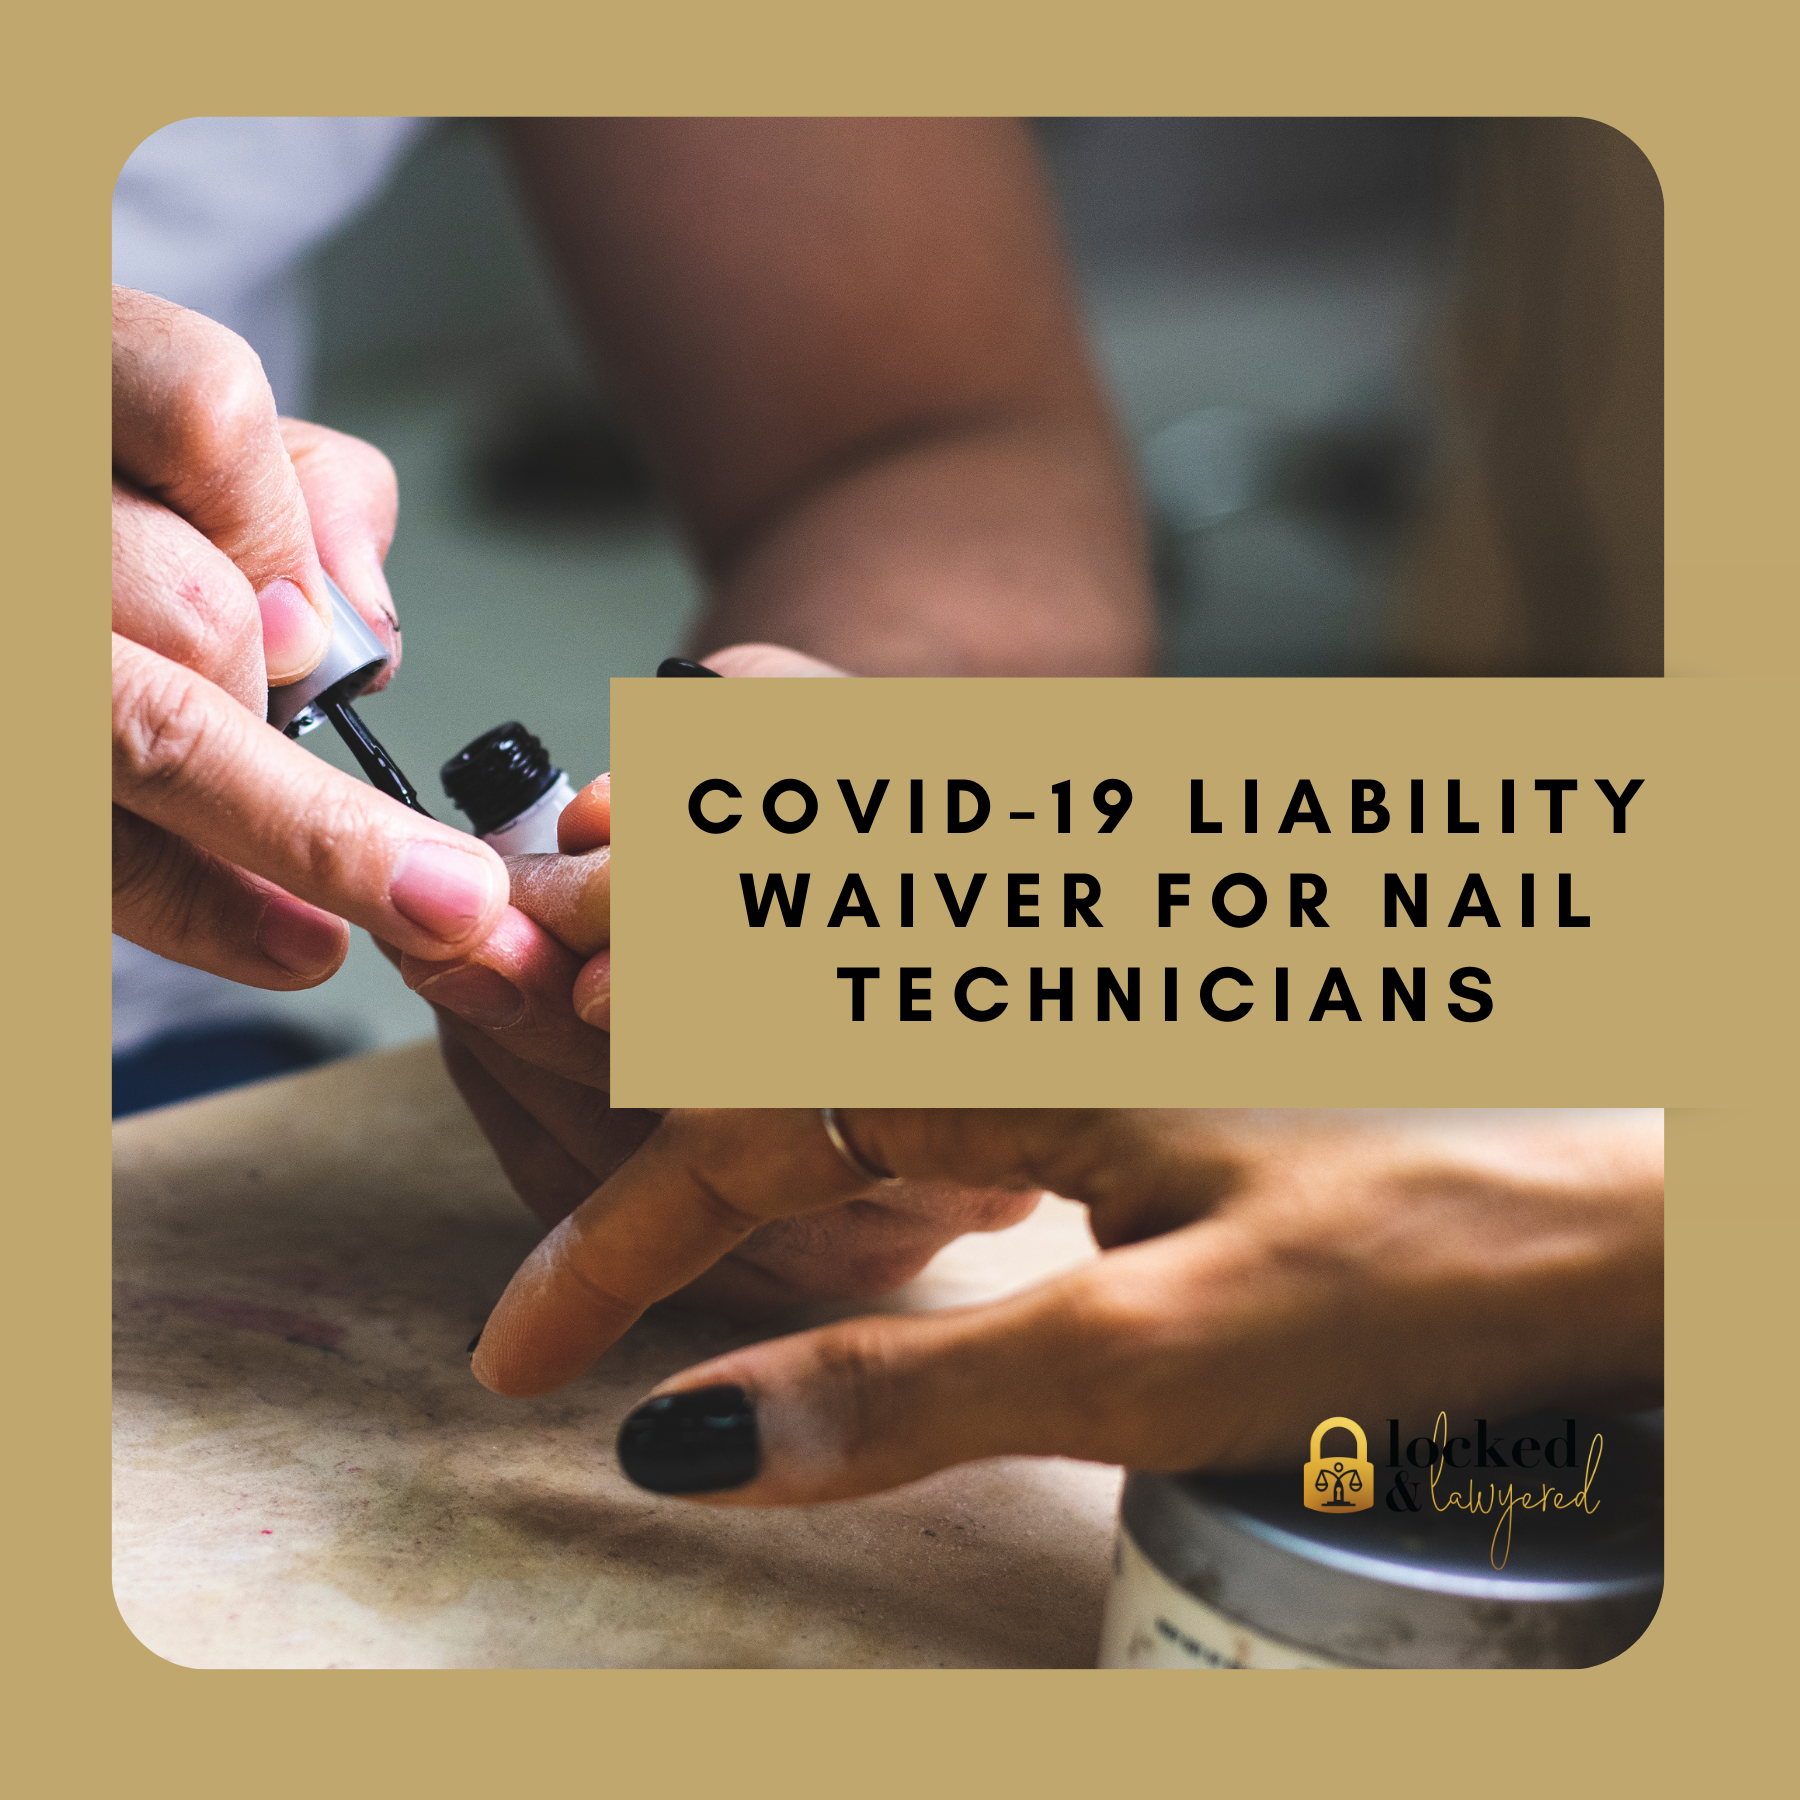 COVID-19 Liability Waiver for Nail Technicians